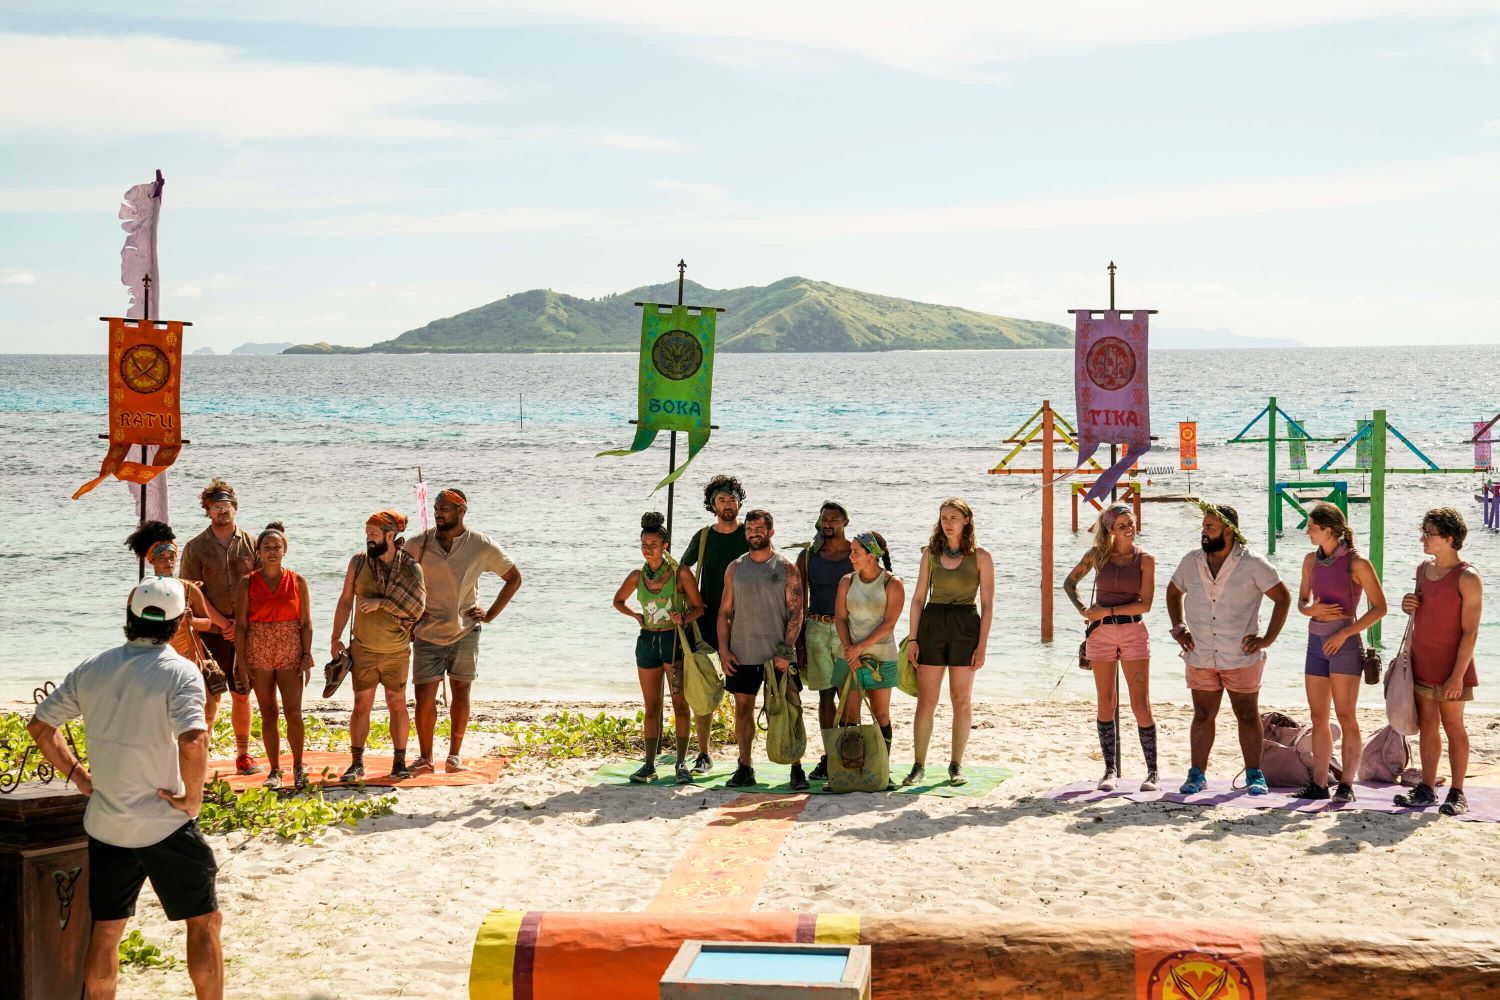 The Ratu, Soka, and Tika tribes stand on their respective mats on the beach and listen to host Jeff Probst, who recently gave away showmance spoilers, during a challenge in 'Survivor' Season 44 Episode 3, 'Sneaky Little Snake,' on CBS.